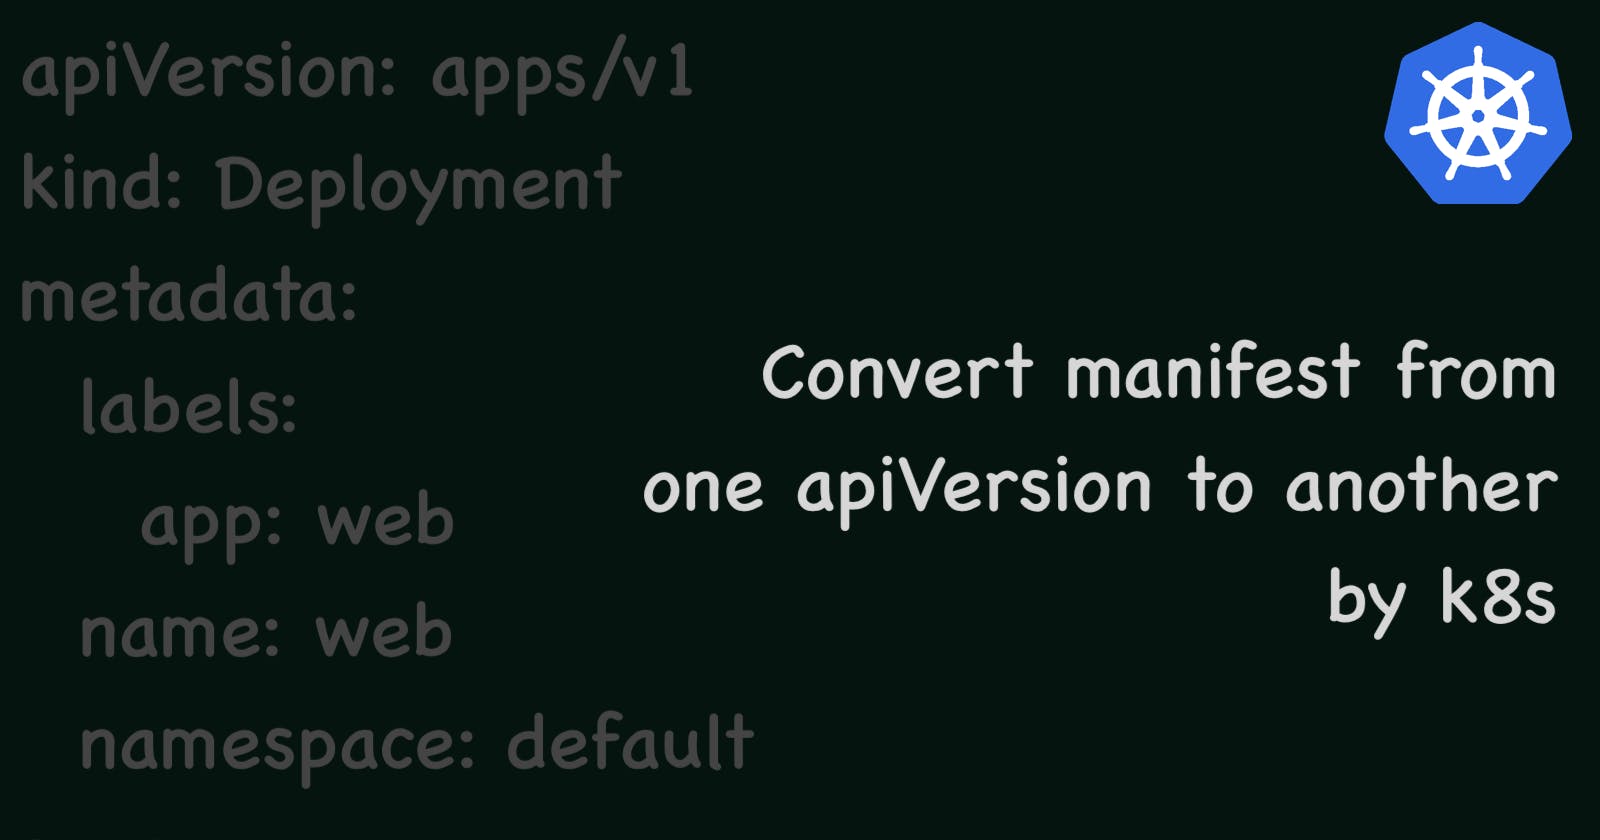 Get a specific apiVersion manifest from k8s